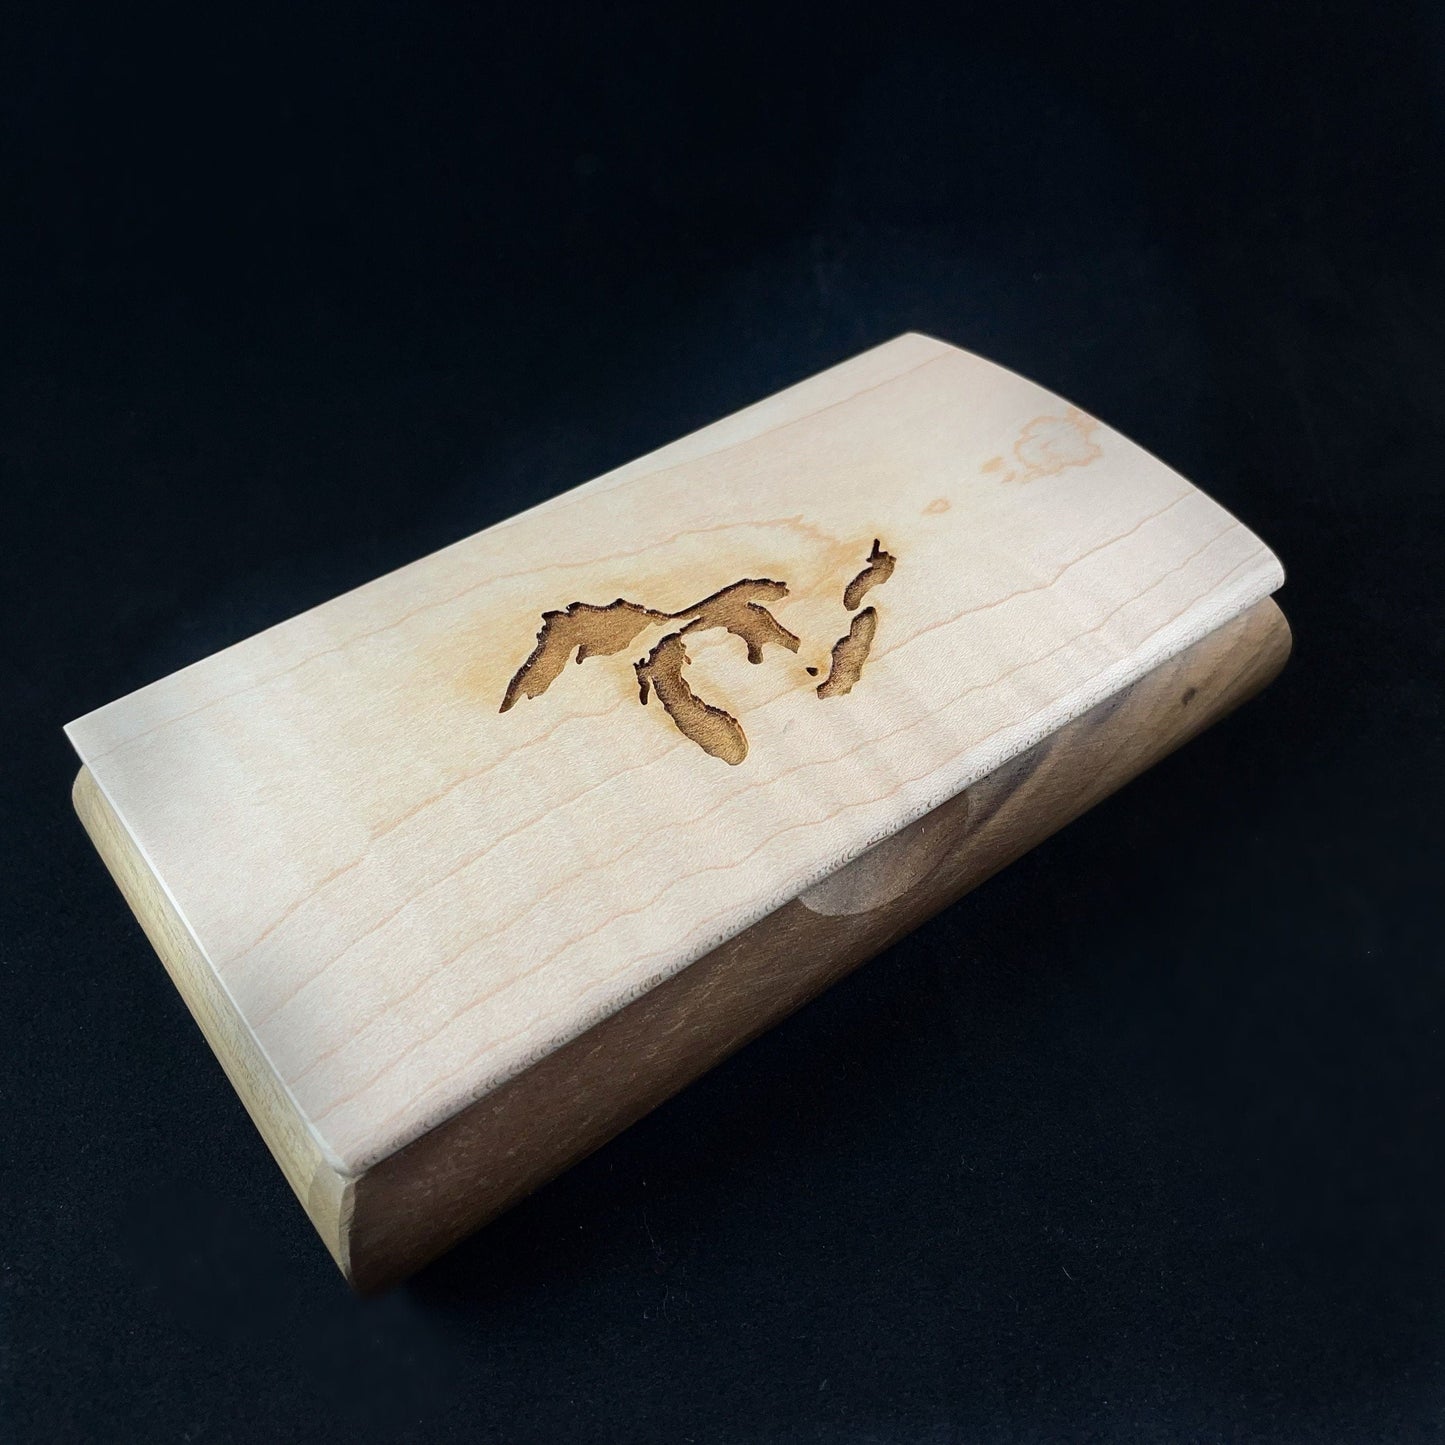 Great Lakes Handmade Wooden Box - Curly Maple and Walnut